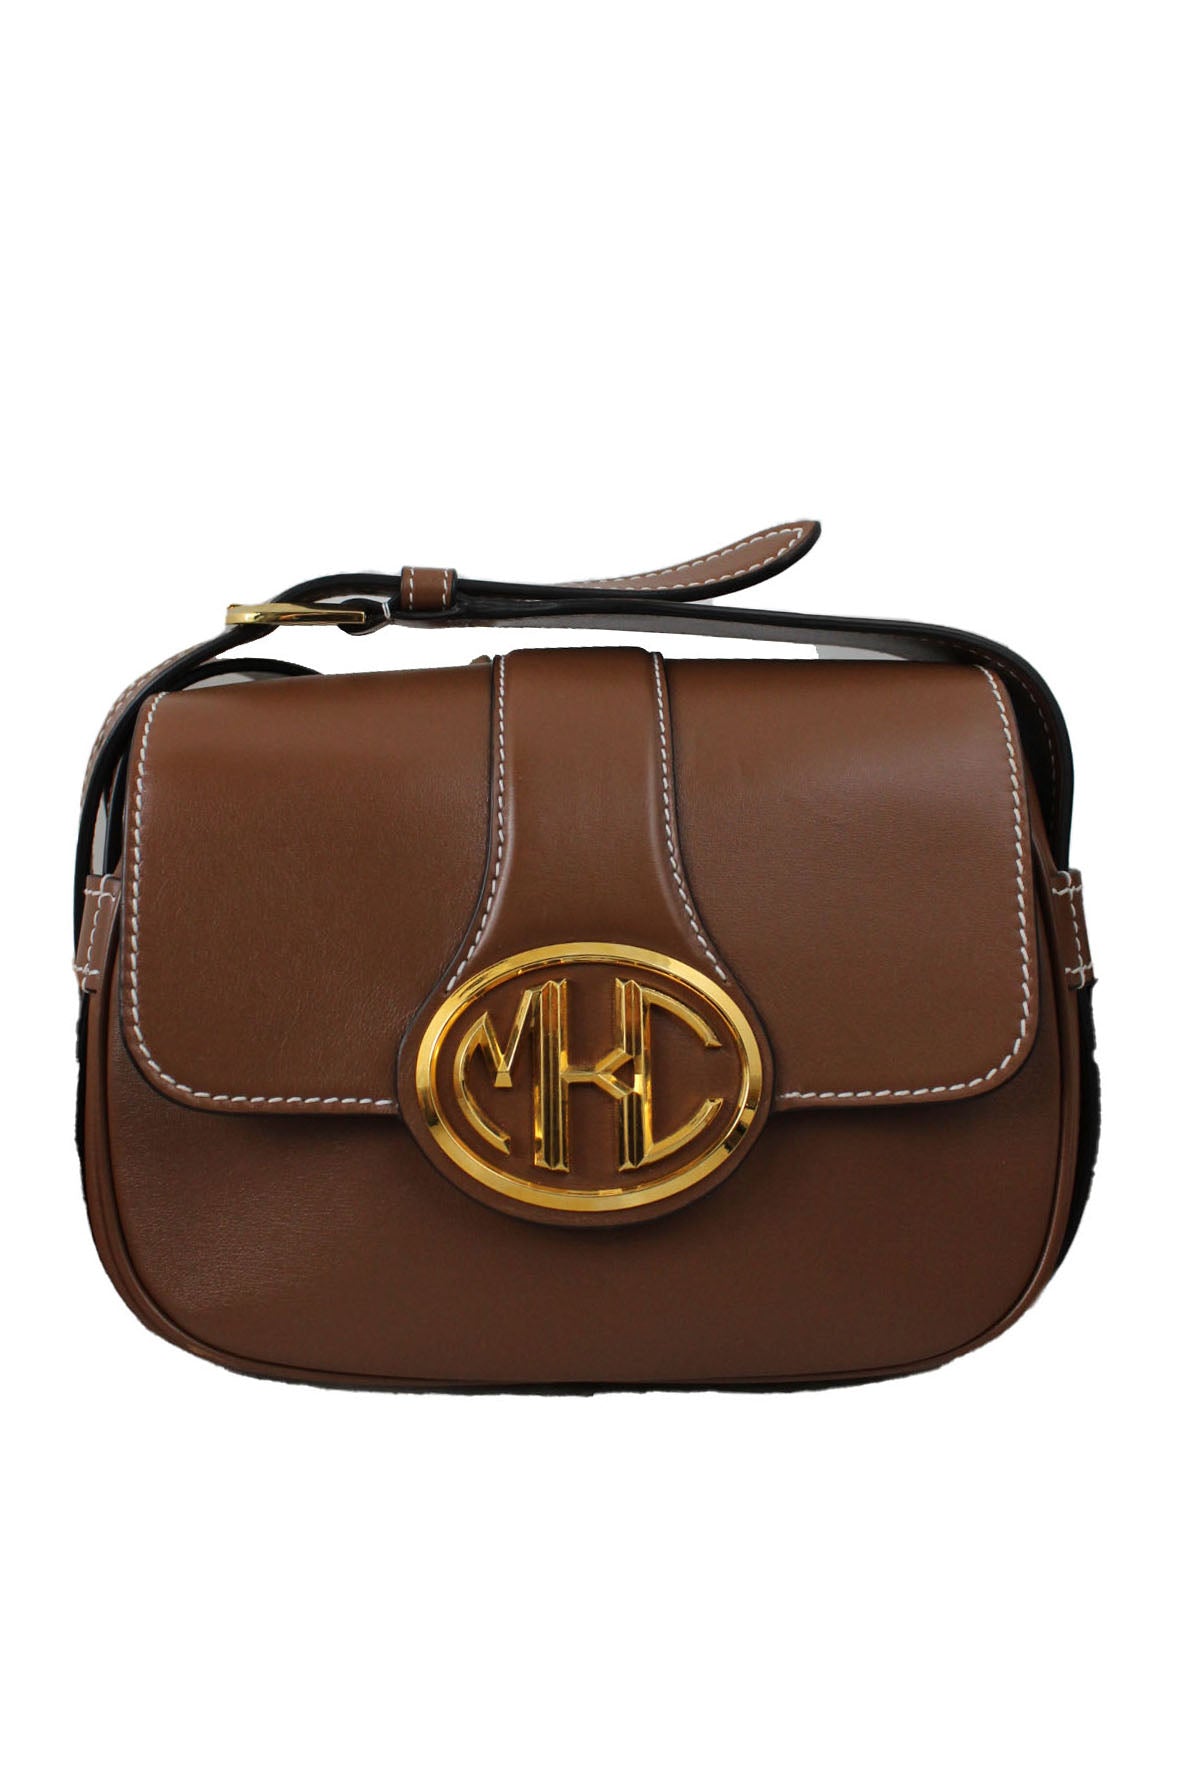 front of michael kors brown crossbody bag. features contrast stitching in white, flap top, gold toned hardware, adjustable straps, branded design embossed at top, pockets at interior, and snap button closure. 